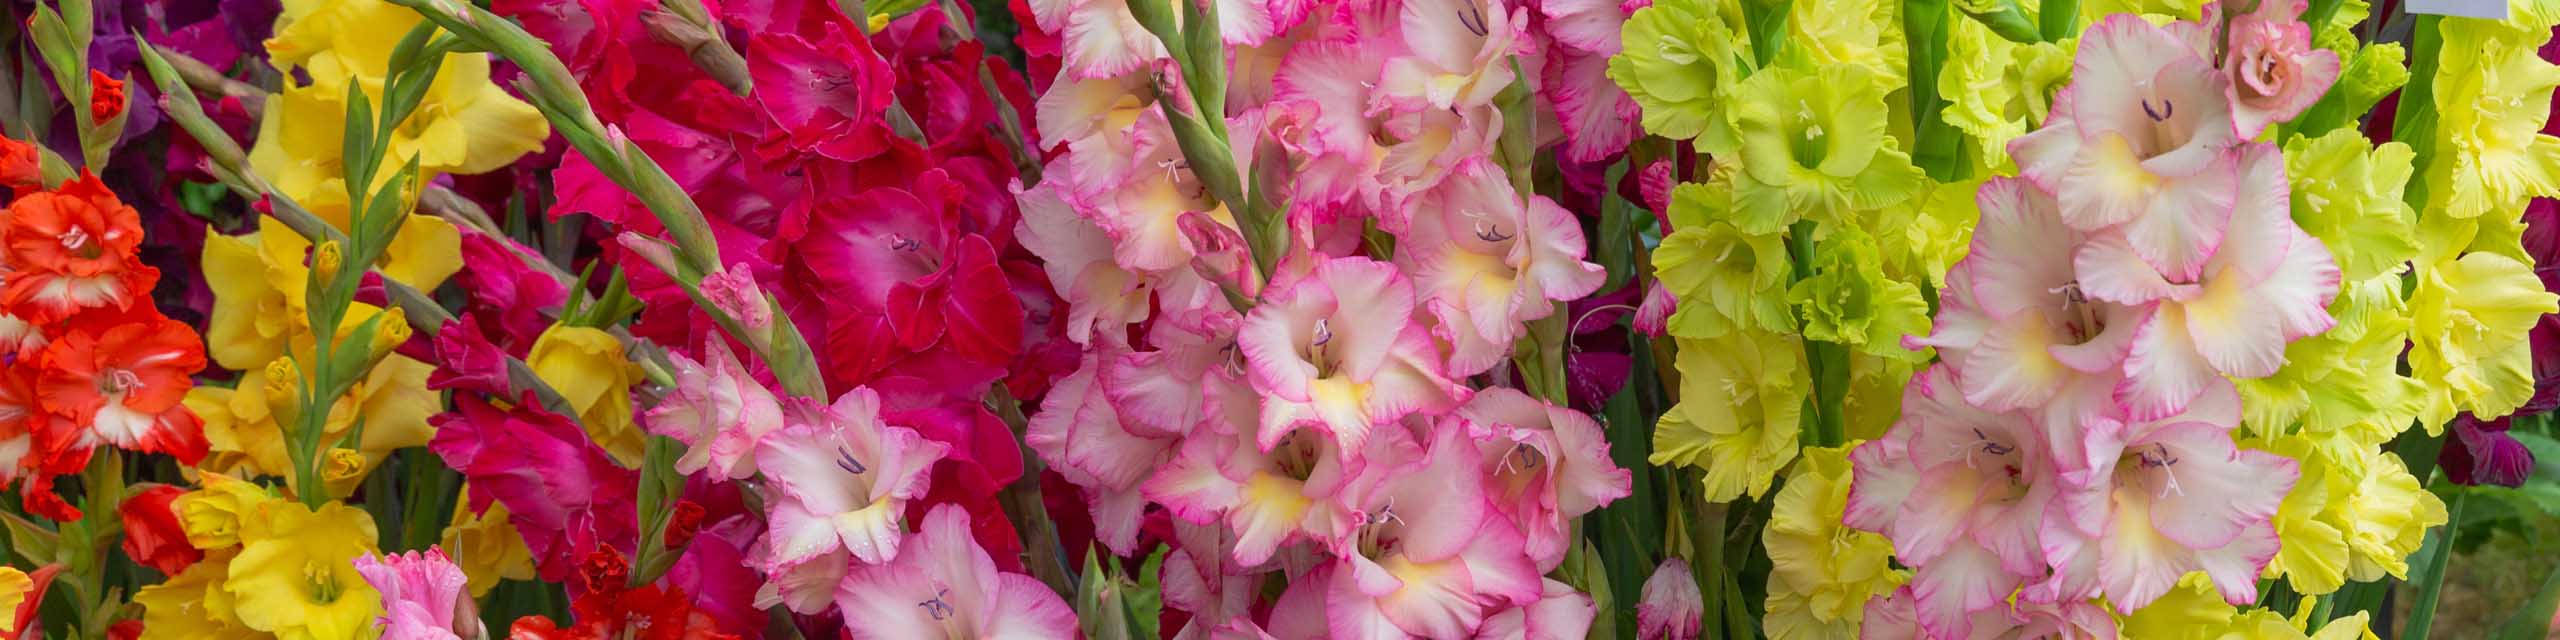 Different colors of gladioli flowers.